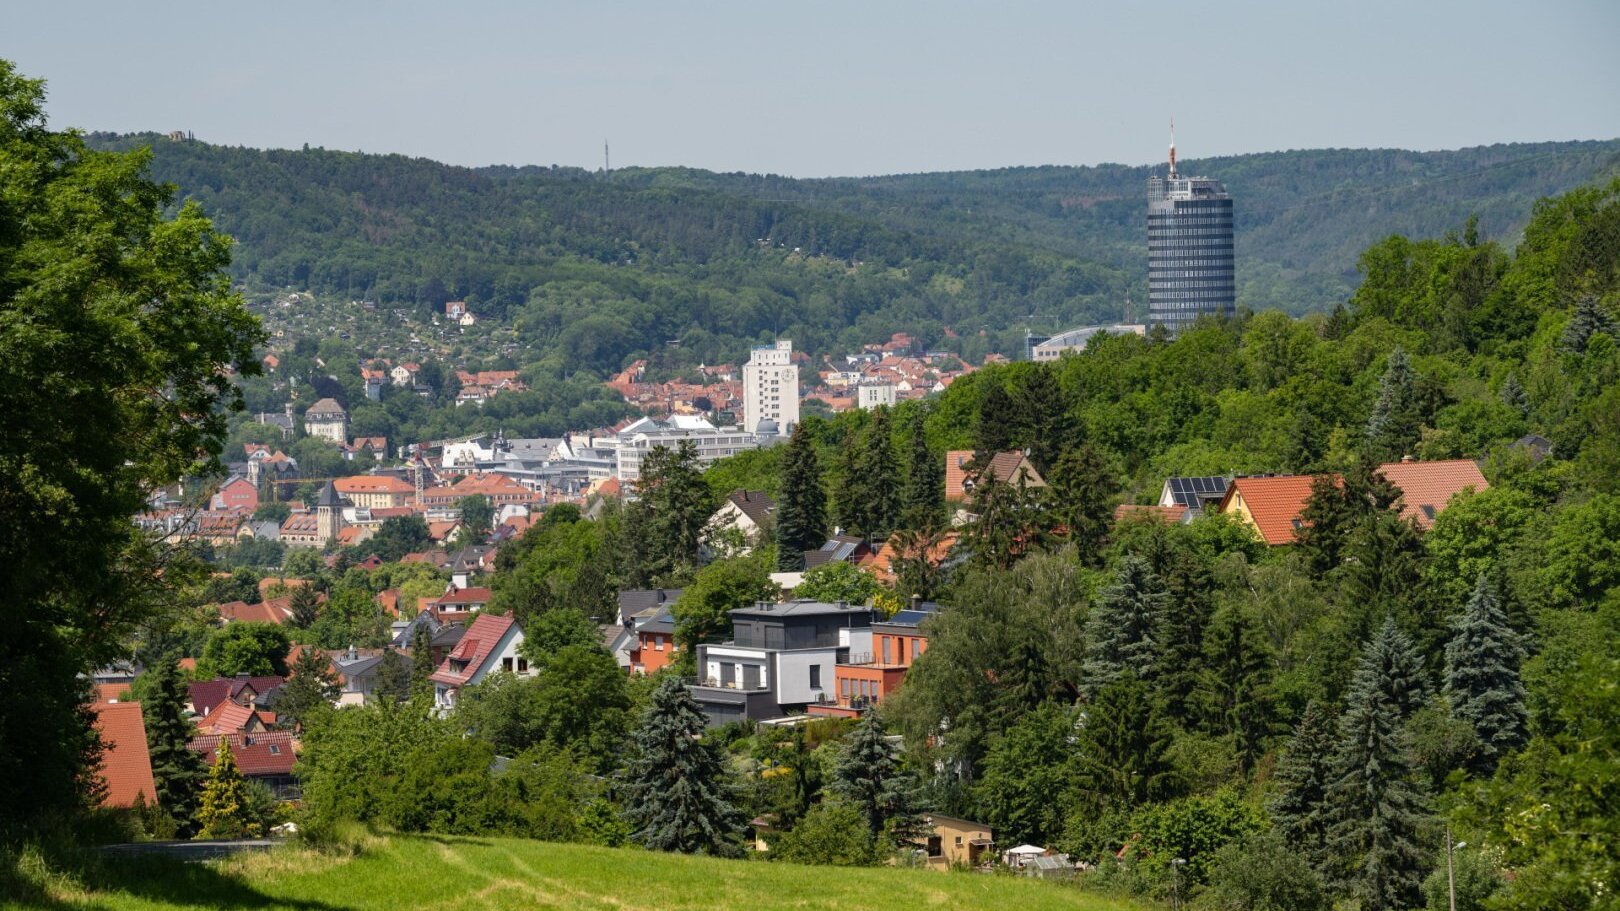 View of Jena's city centre